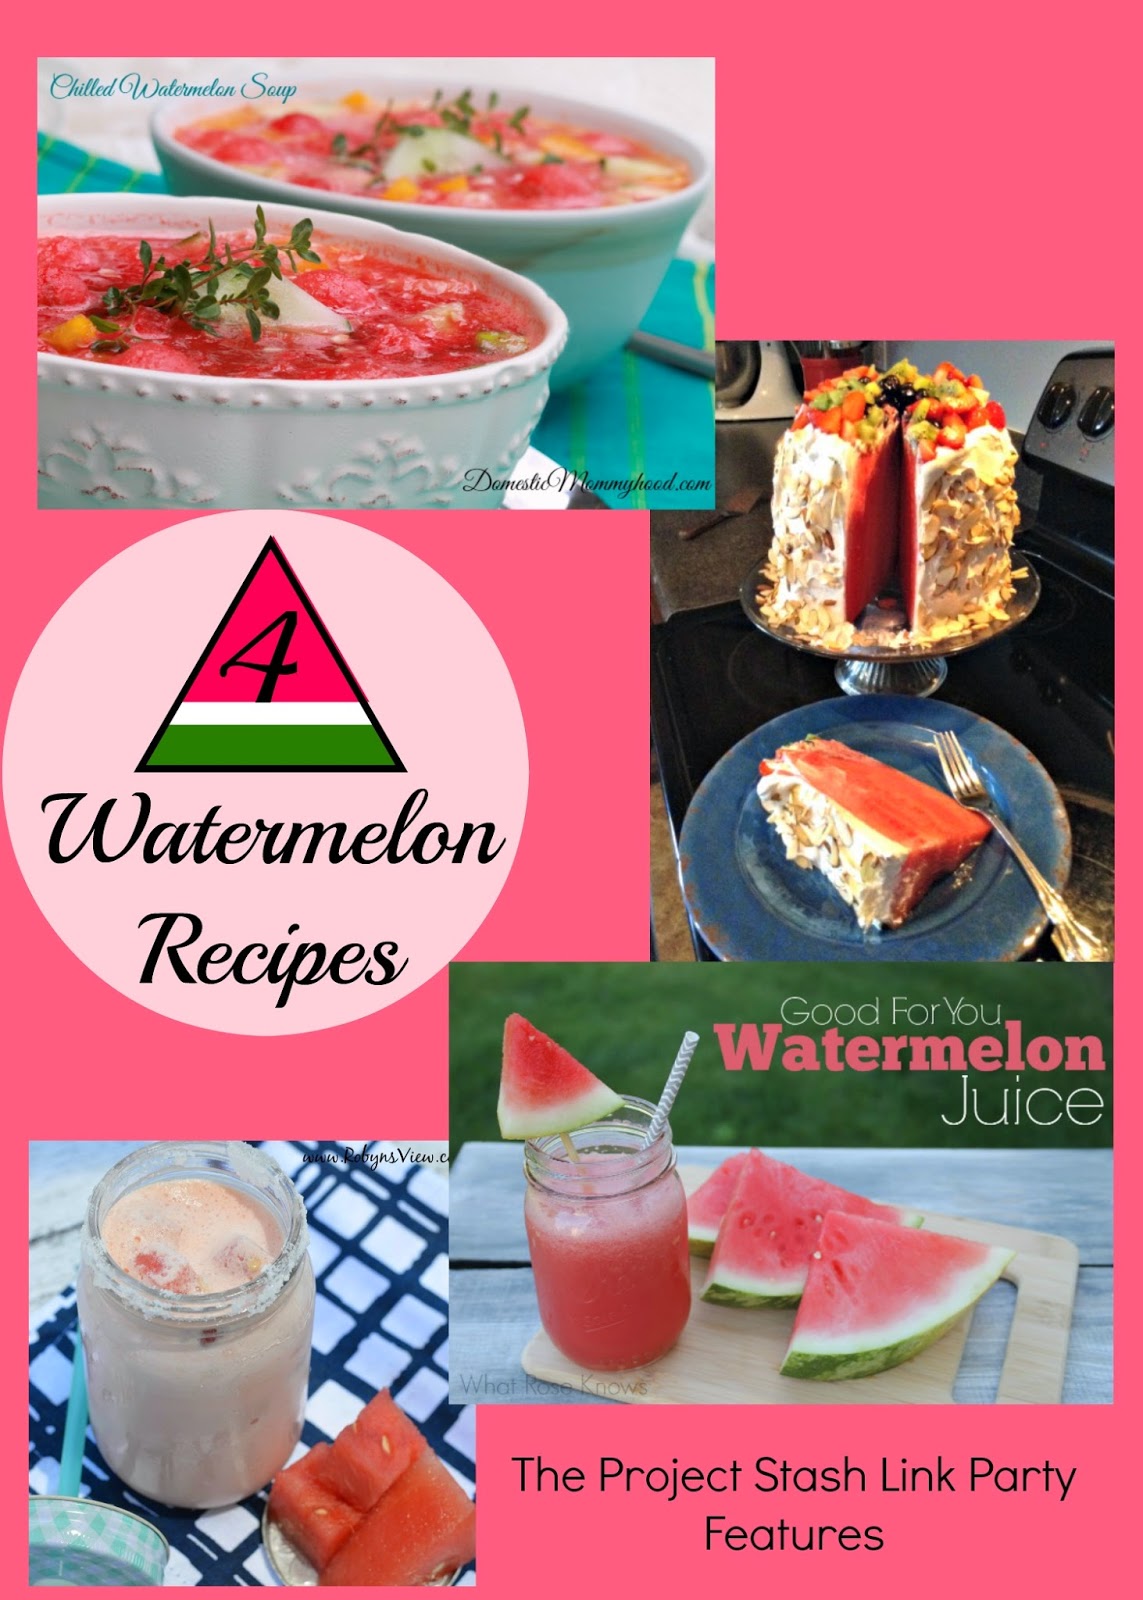 4 Watermelon Recipes & The Project Stash Link Party